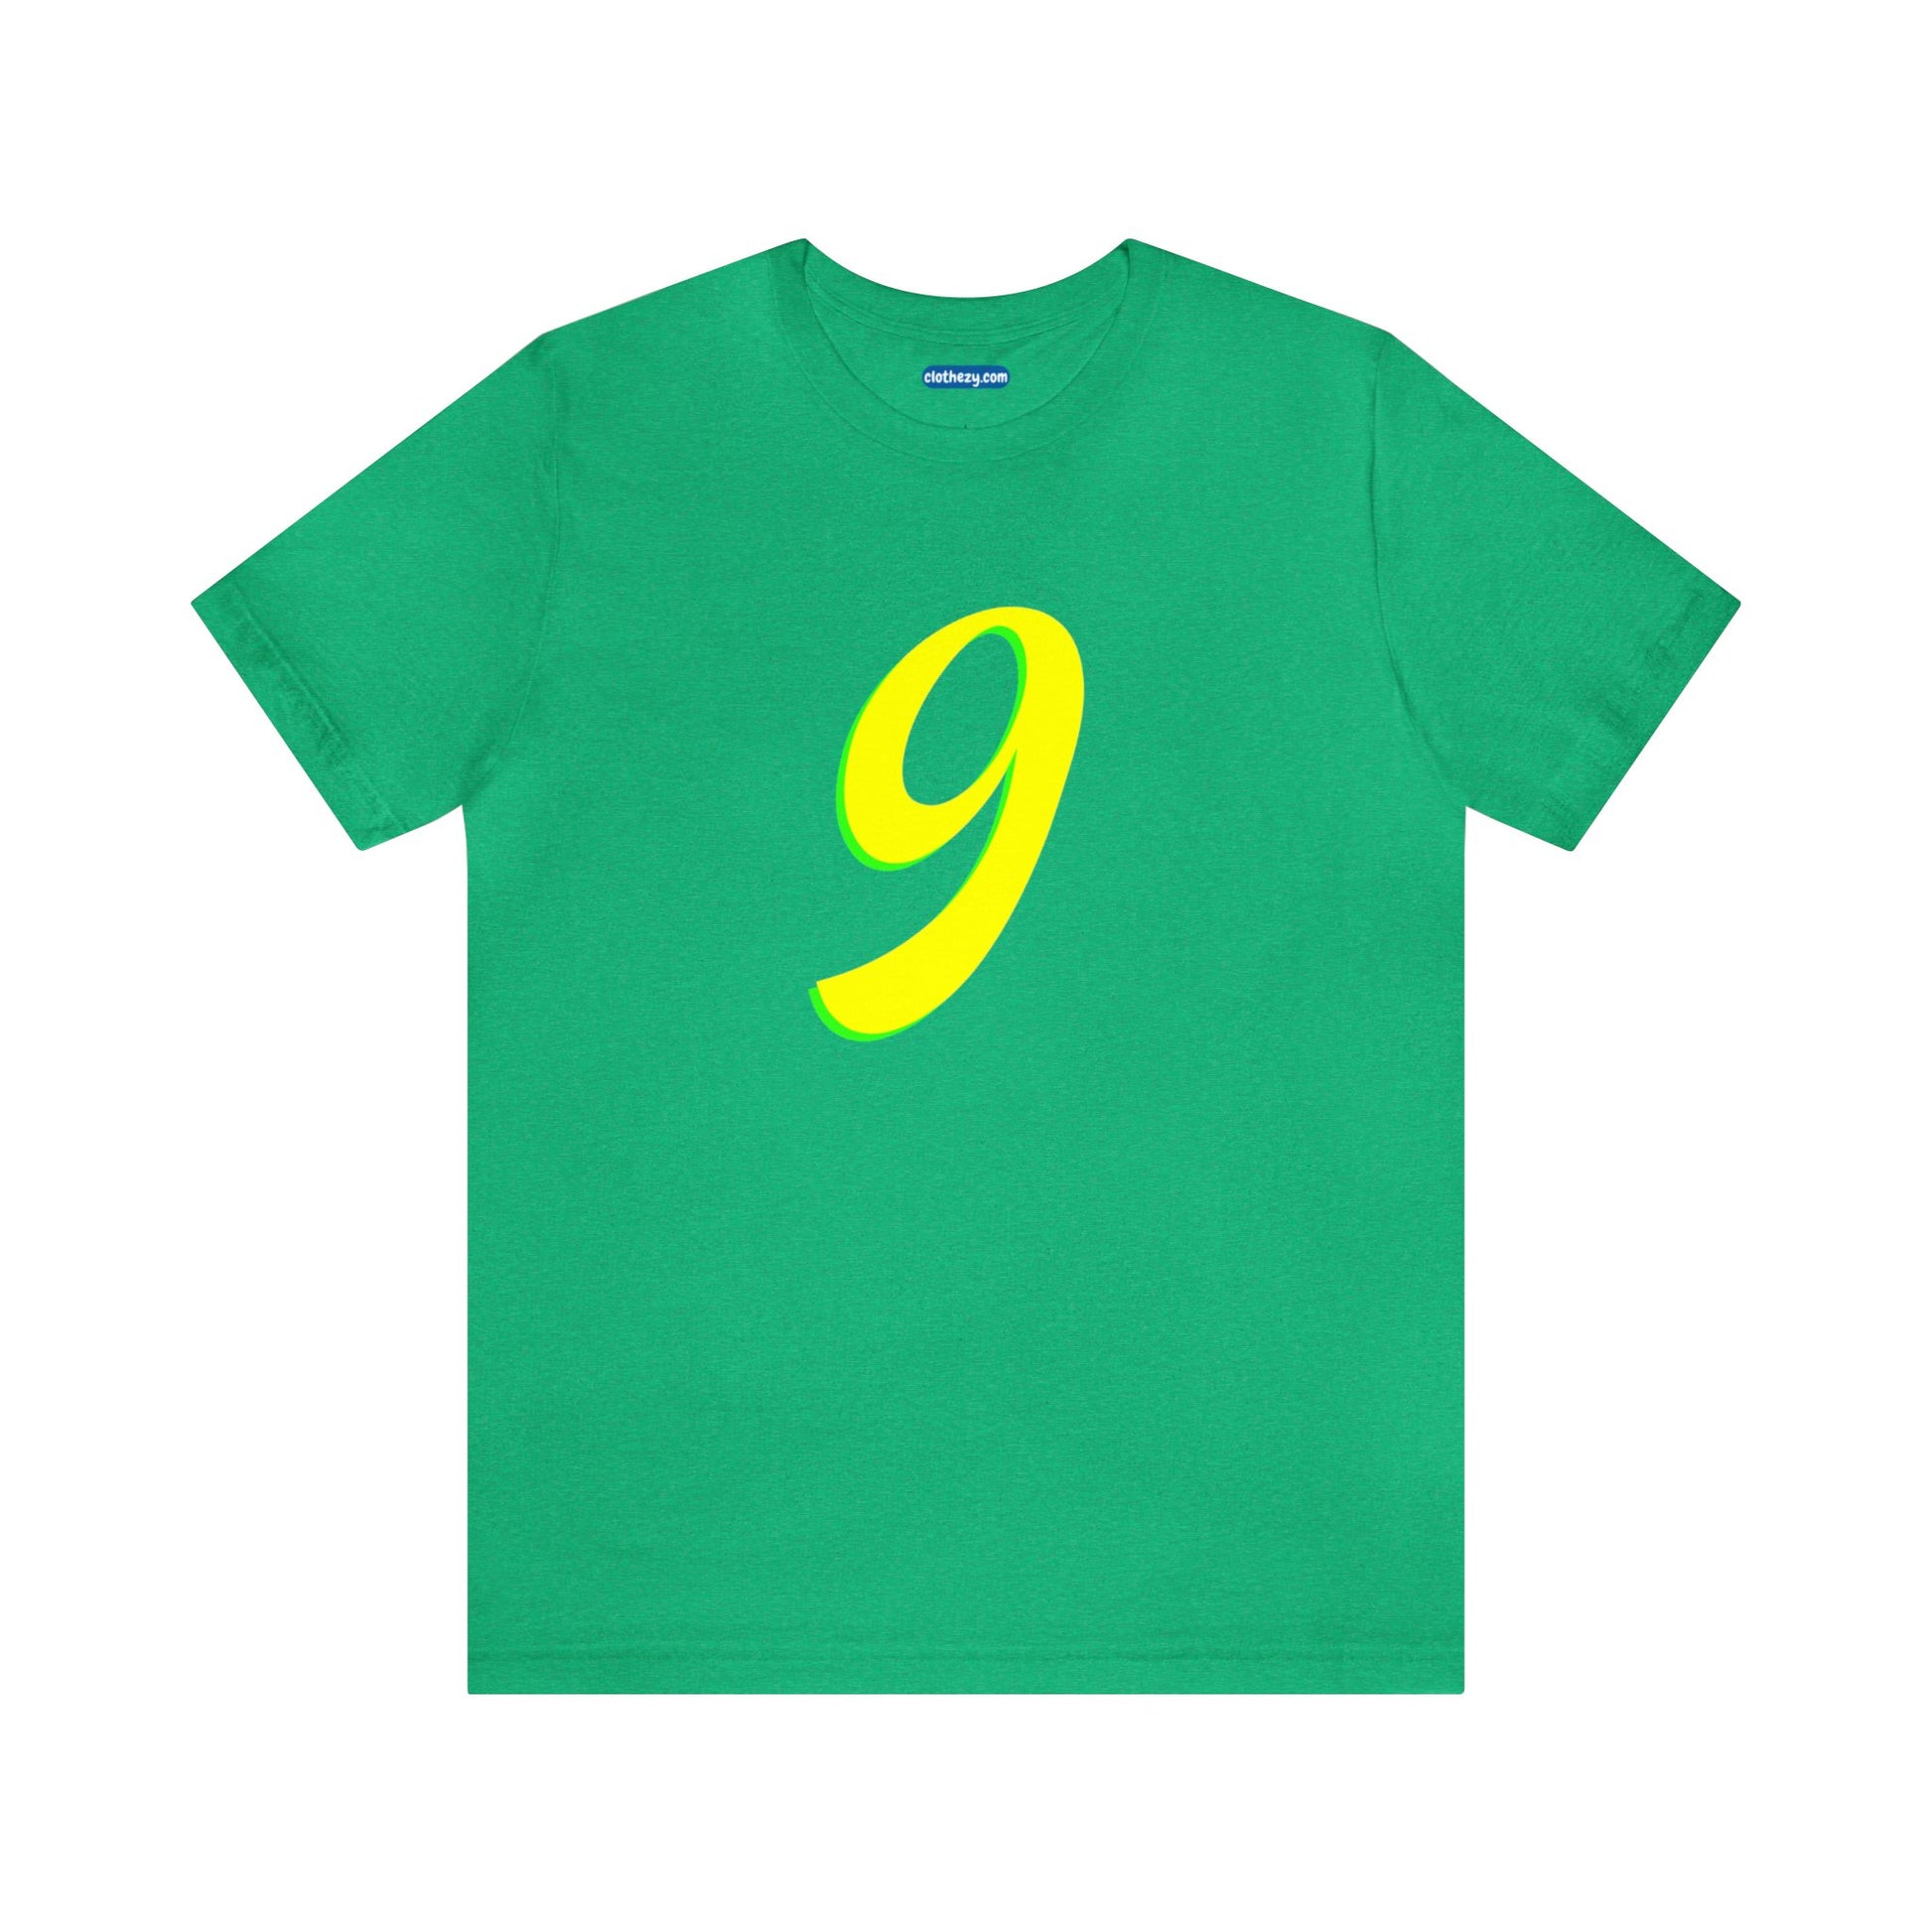 Number 9 Design - Soft Cotton Tee for birthdays and celebrations, Gift for friends and family, Multiple Options by clothezy.com in Royal Blue Heather Size Small - Buy Now